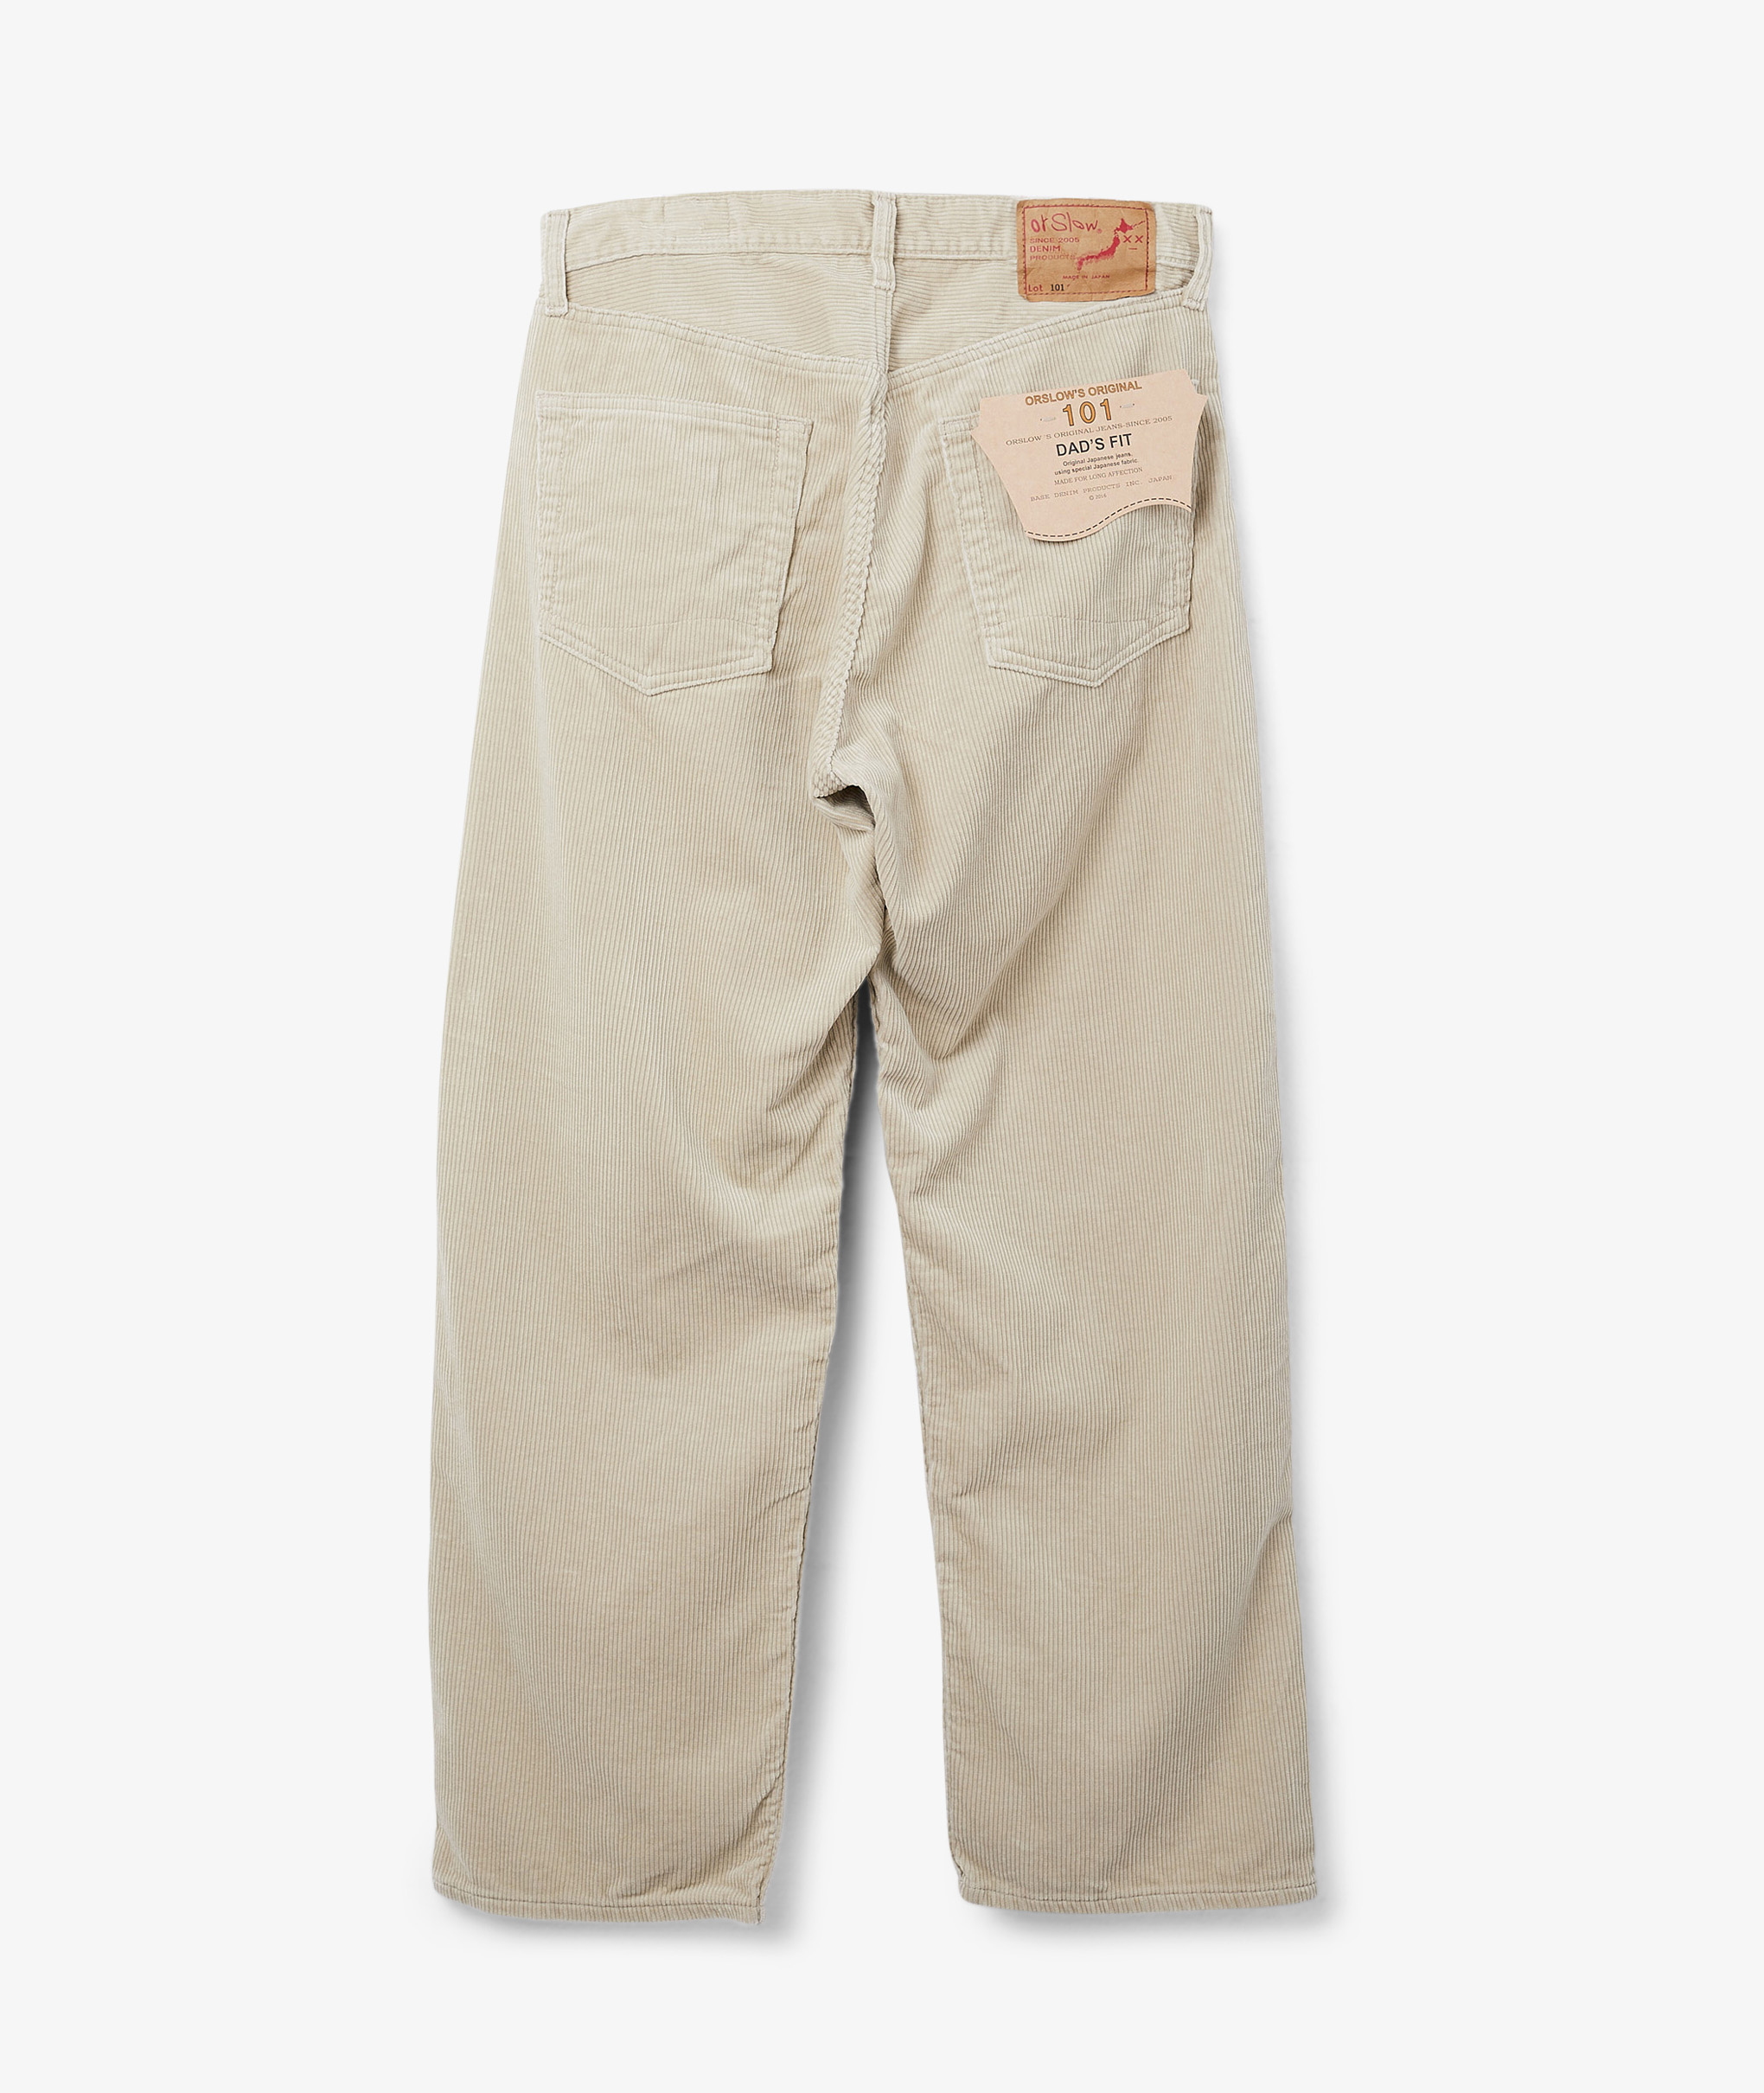 Norse Store | Shipping Worldwide - orSlow 101 DAD'S FIT CORDUROY PANTS ...